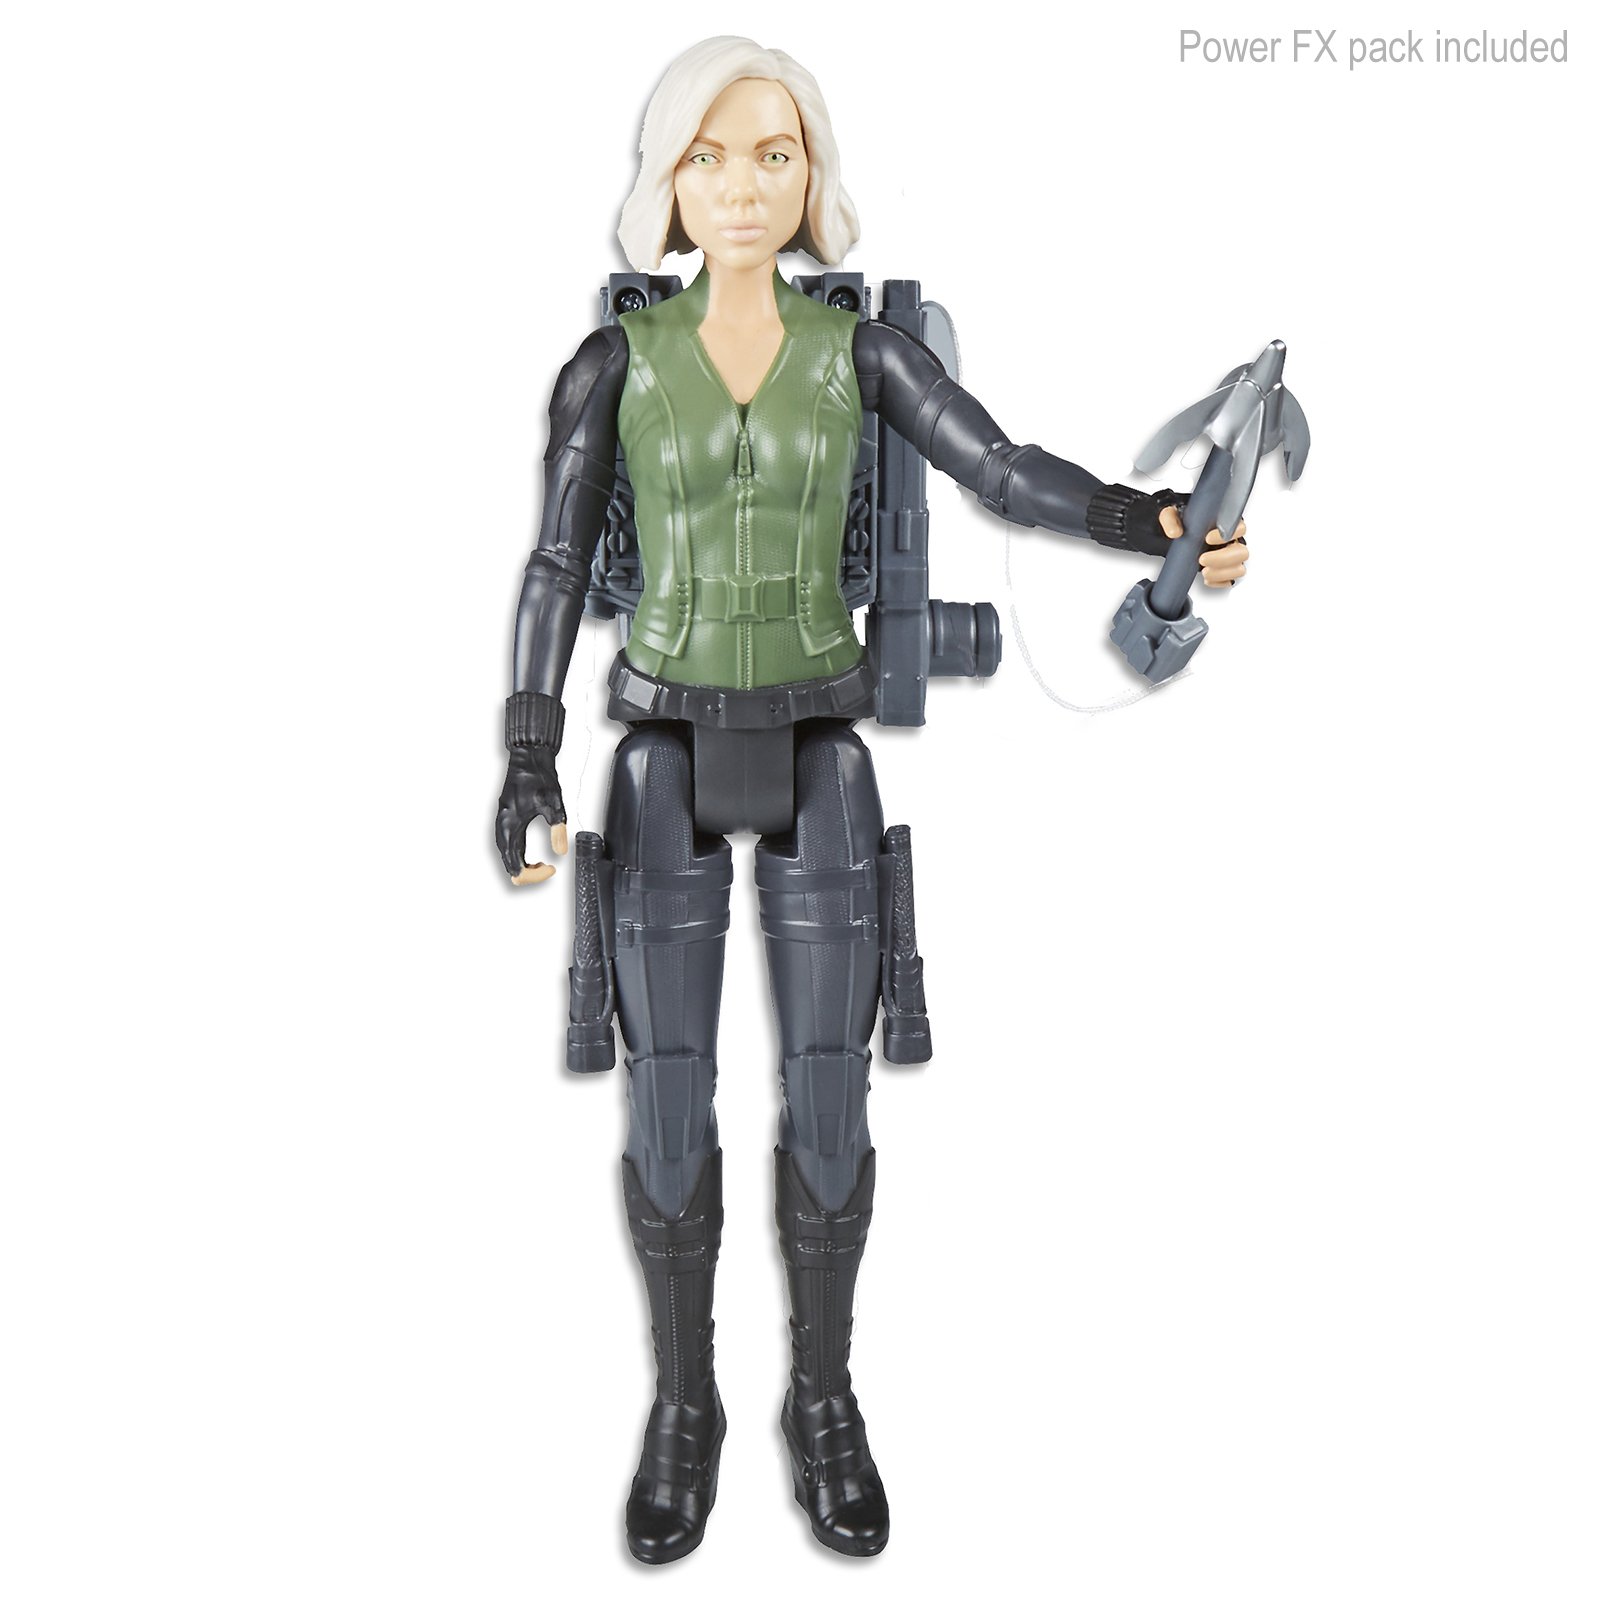 Avengers Marvel Infinity War Titan Hero Power FX Black Widow Includes figure, pack, accessory, and instructions Ages 4 and up